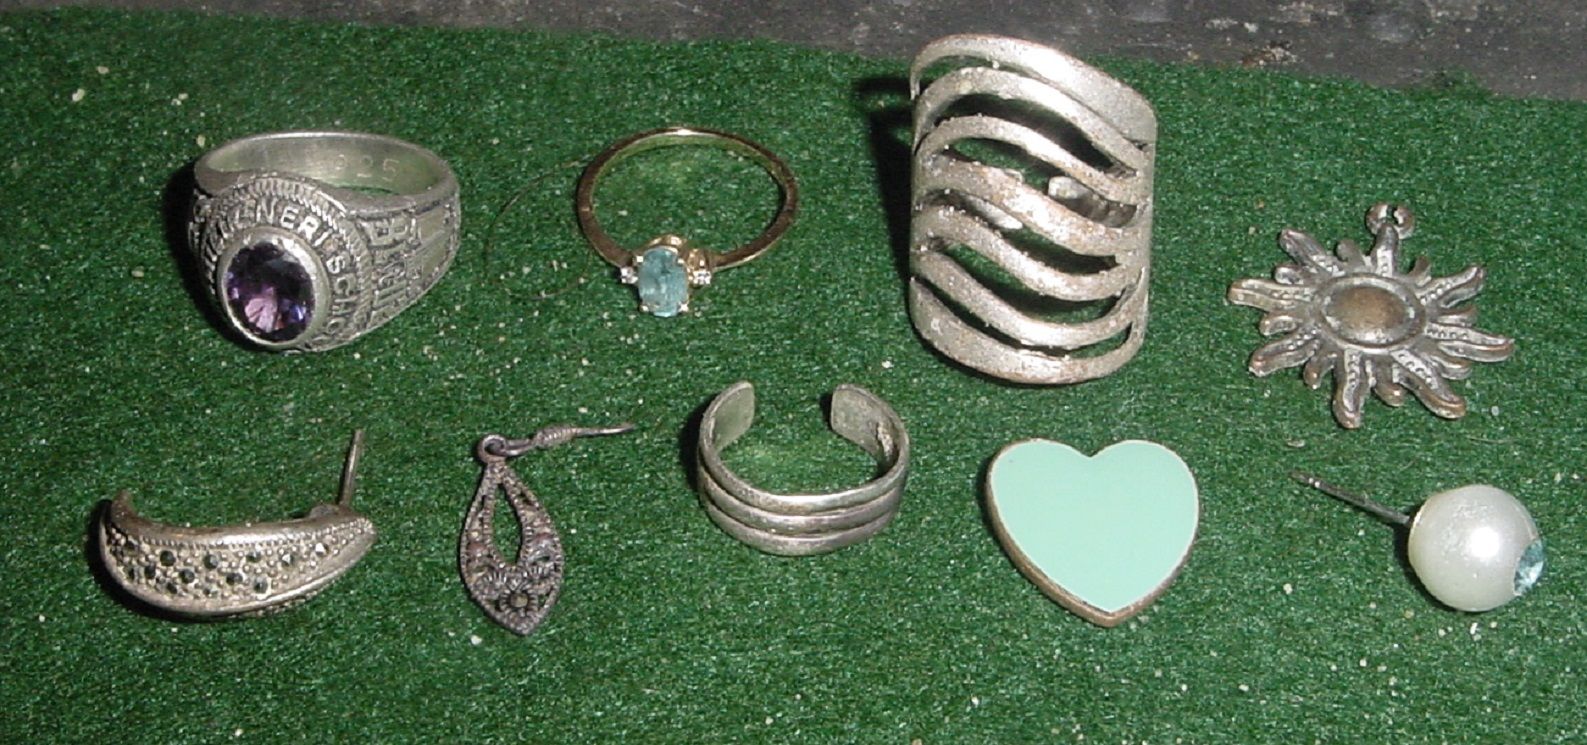 JEWELRY FINDS FROM NJ BEACHES